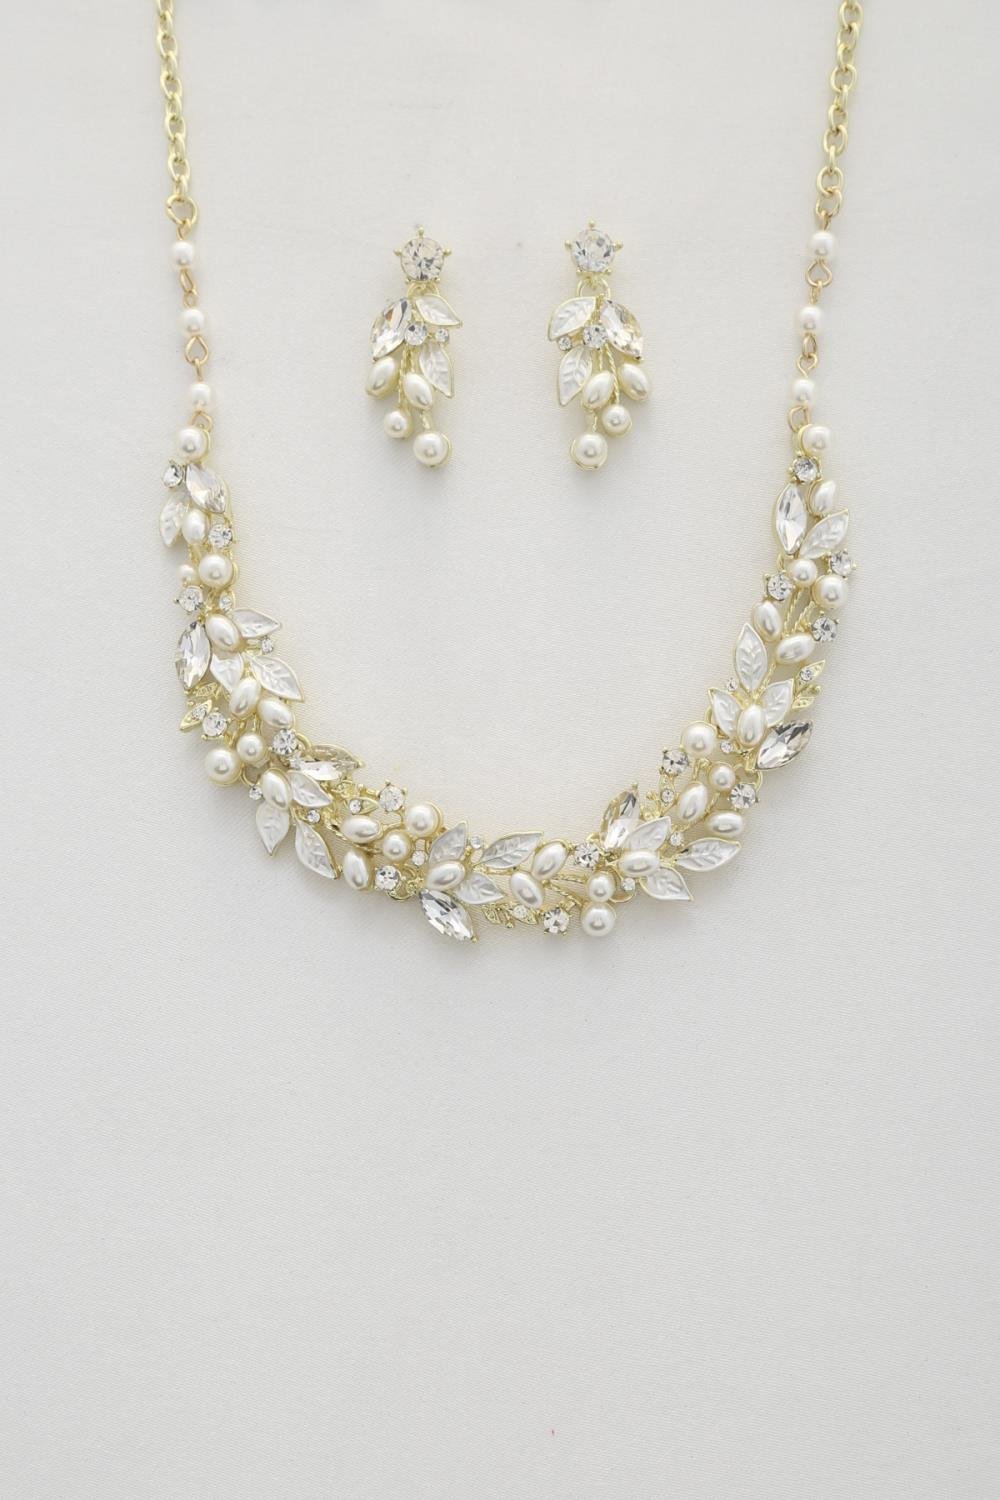 Leaf Pattern Pearl Crystal Necklace - Love It Clothing